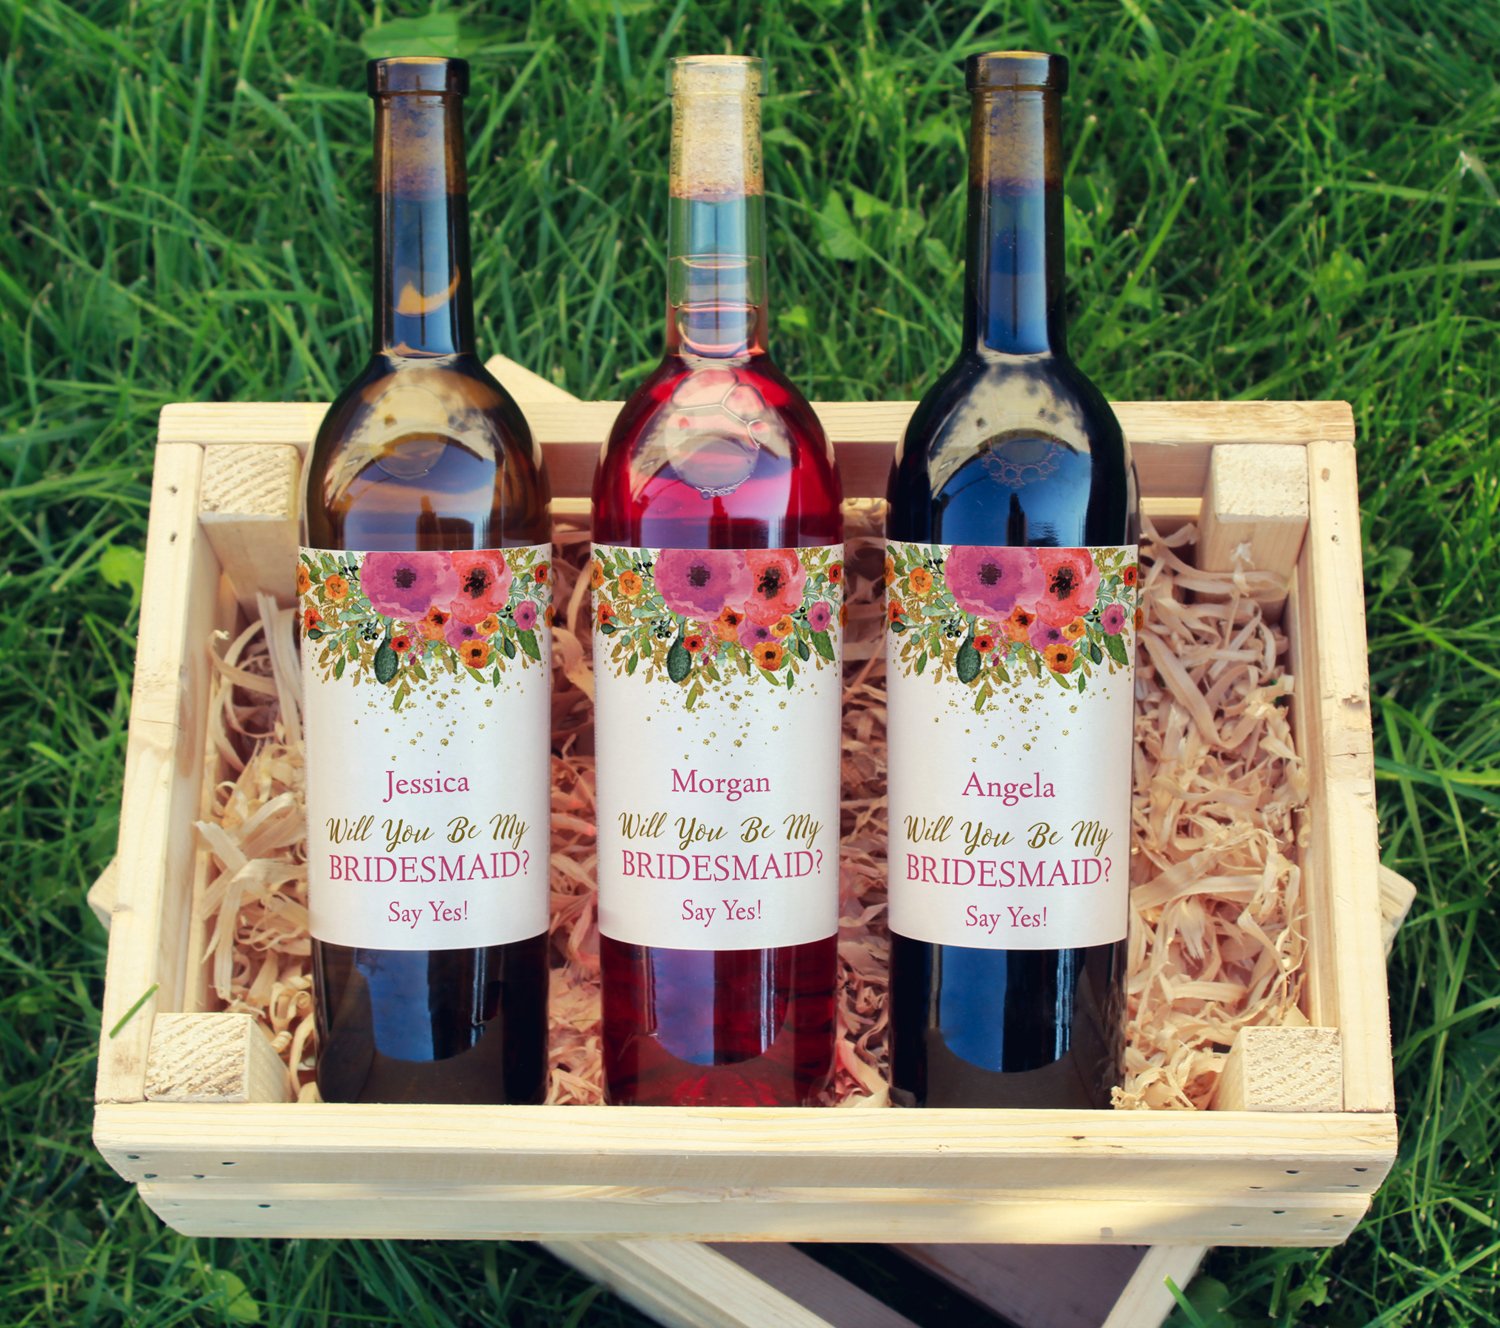 Bottles of wine with bridesmaid labels on them.